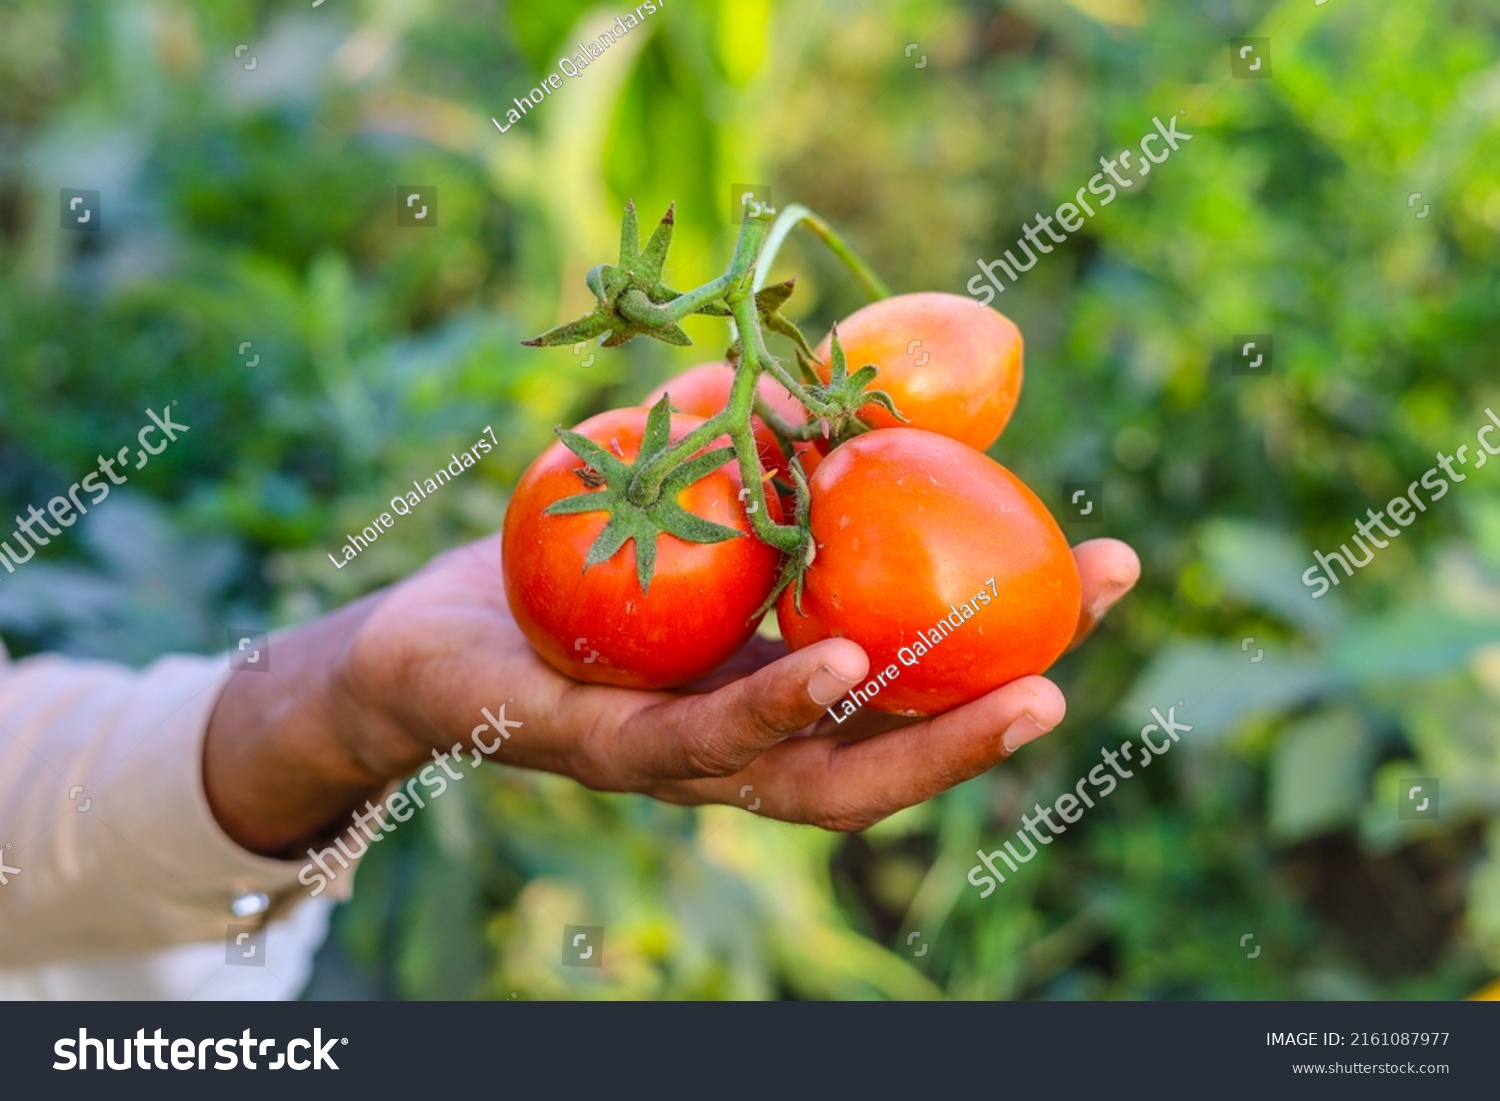 Close up of bunch of red tomatoes on hand. Tomatoe isolated on hand. Bunch of tomatoes on hand. Red riped tomatoes on hand. Tomatoes farming in Pakistan and India. With selective focus on subject. #2161087977